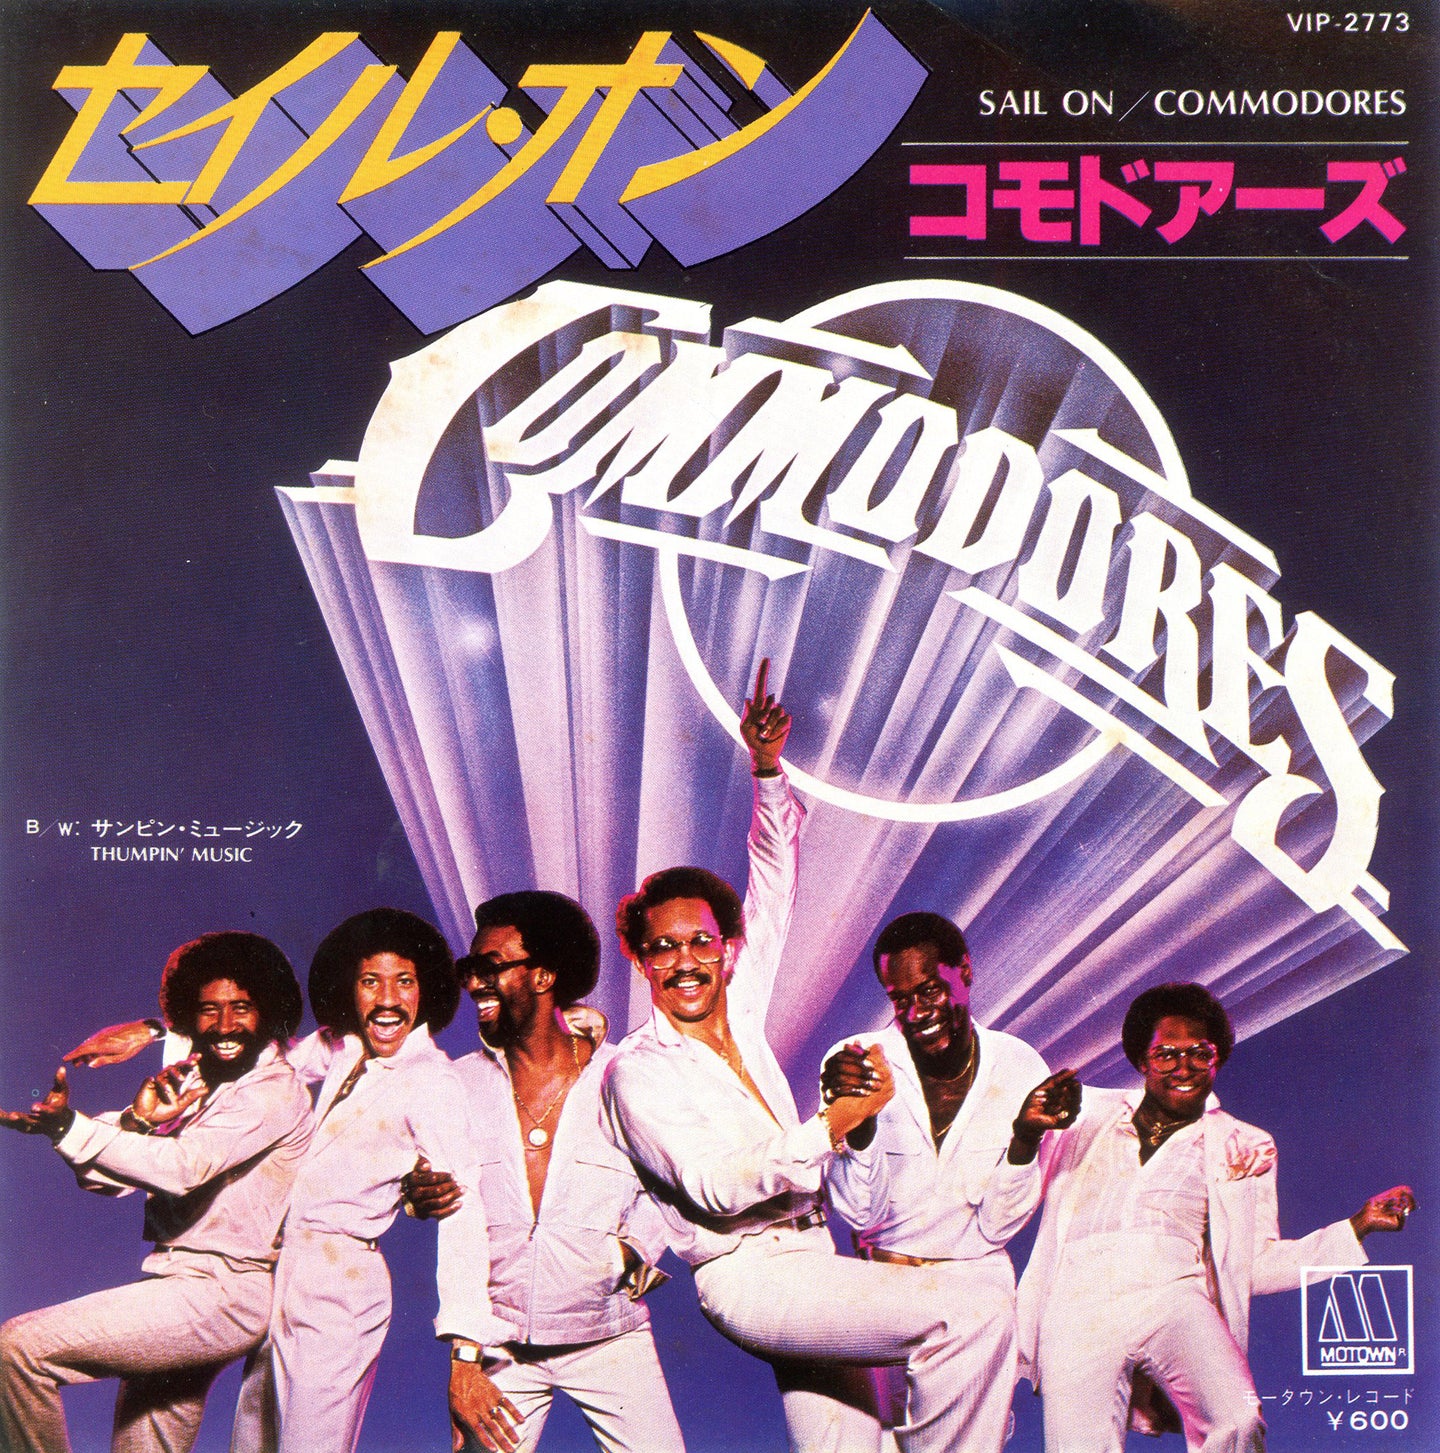 Commodores - Sail On / Thumpin' Music  7